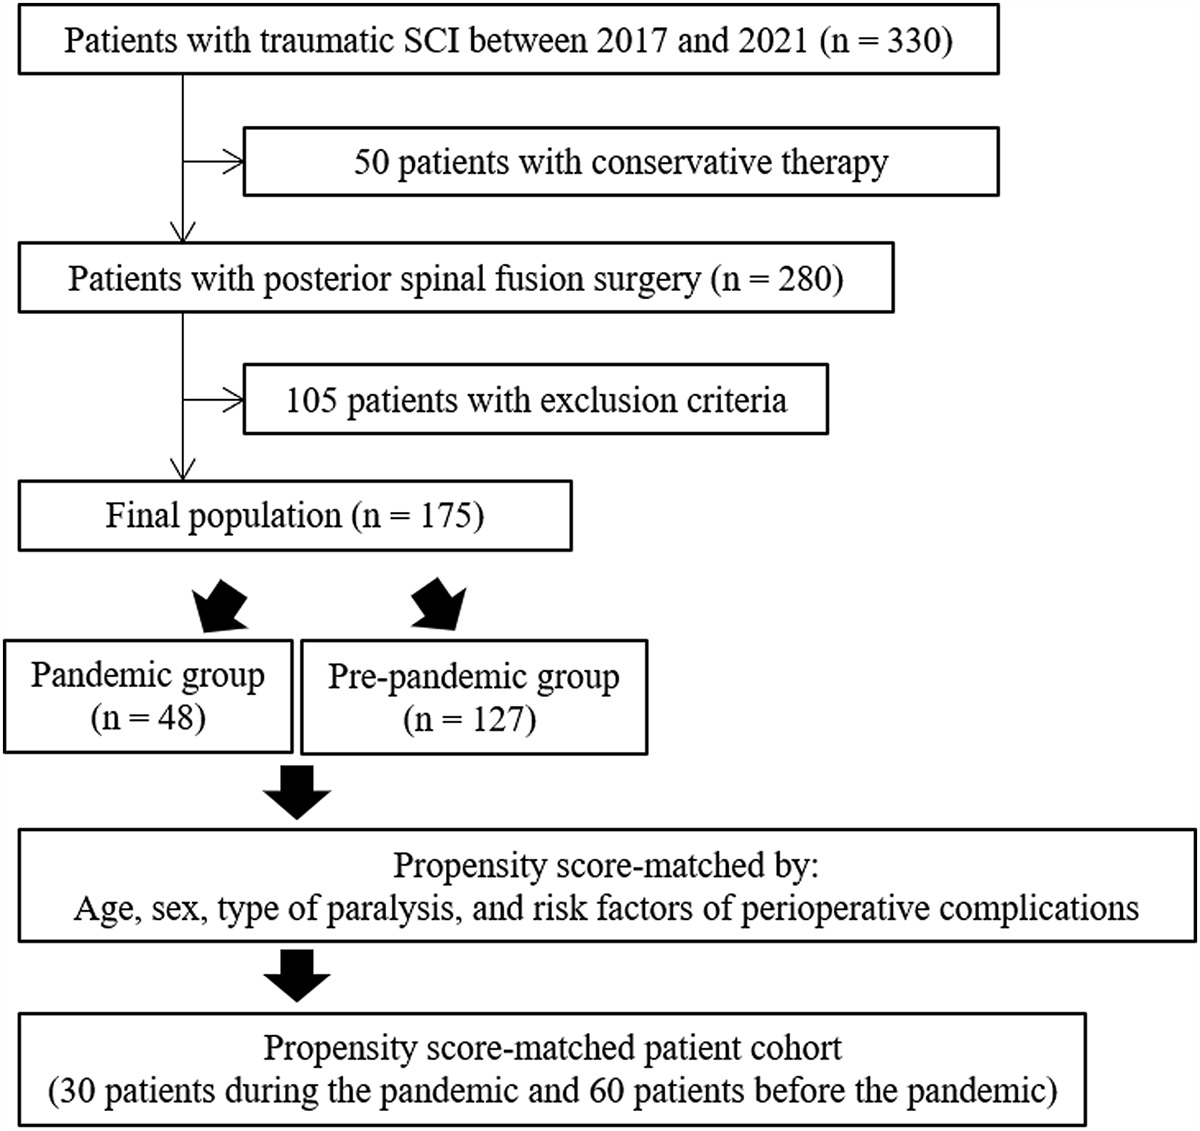 Complications Associated with Preventive Management to Reduce the Risk of COVID-19 Spread After Surgery for Spinal Cord Injury